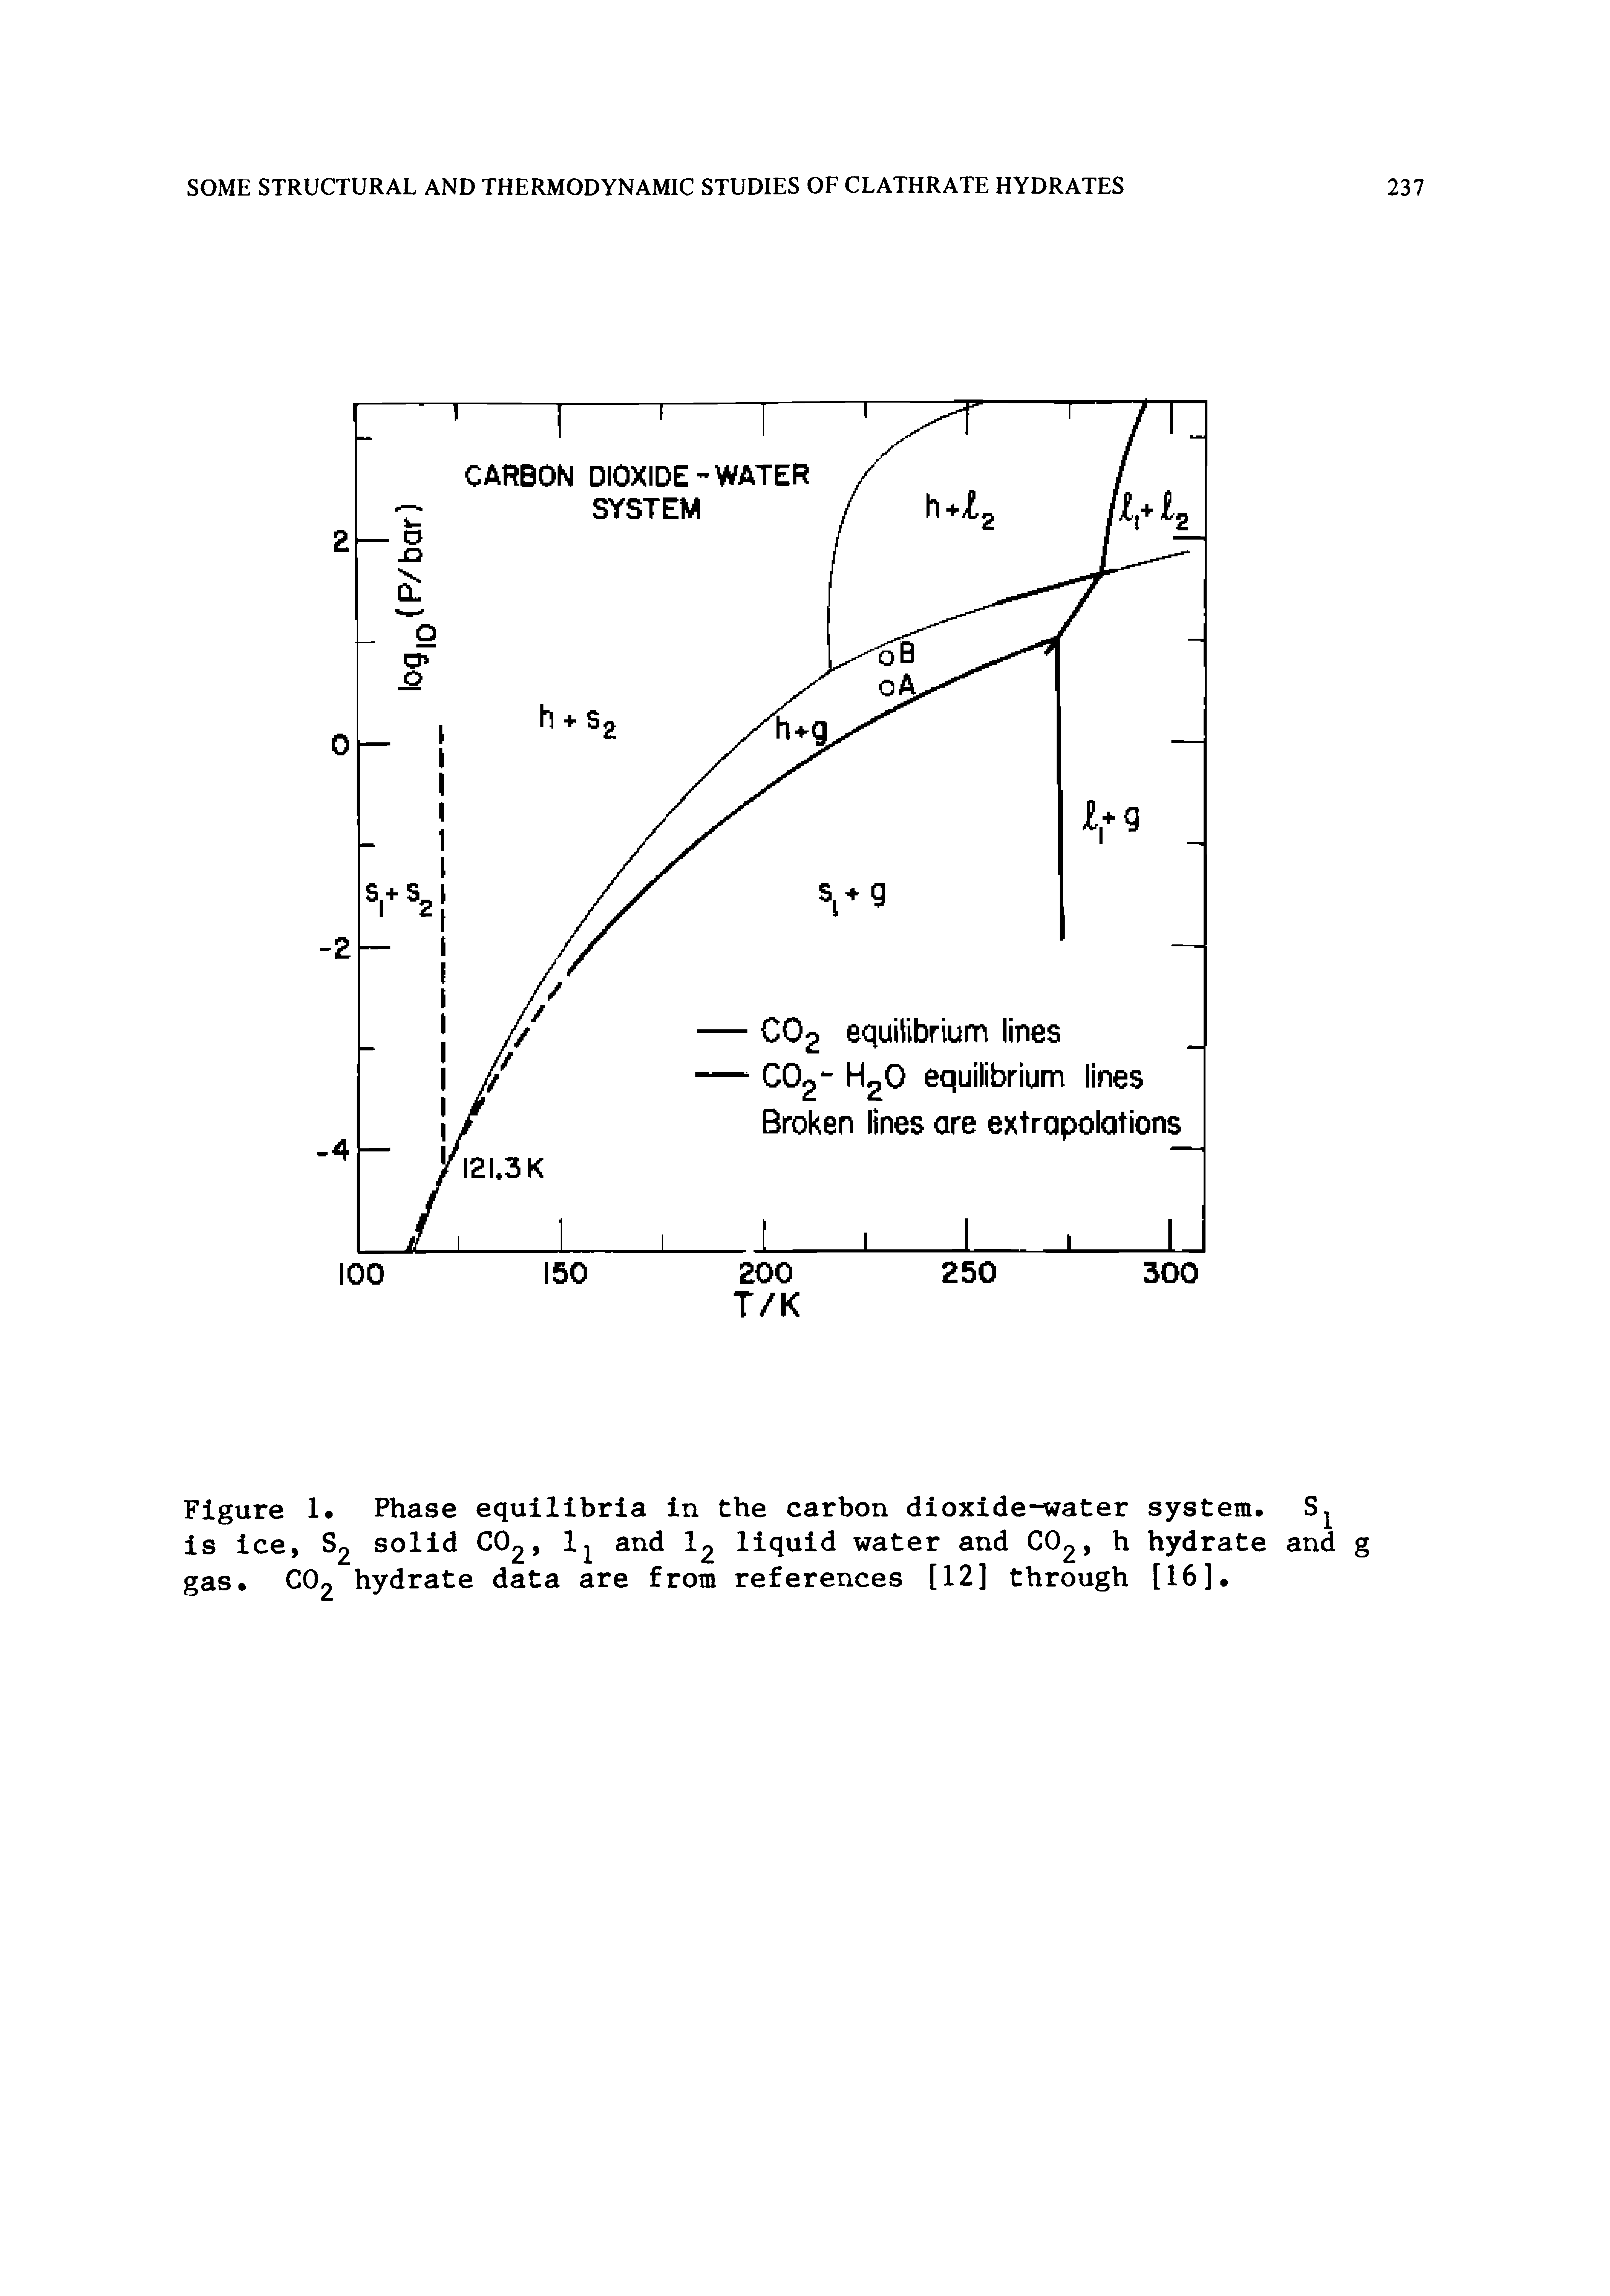 Figure 1. Phase equilibria in the carbon dioxide-water system. is ice, S2 solid CO, 1 and I2 liquid water and CO2, h hydrate and g gas. CO2 hydrate data are from references [12] through [16].